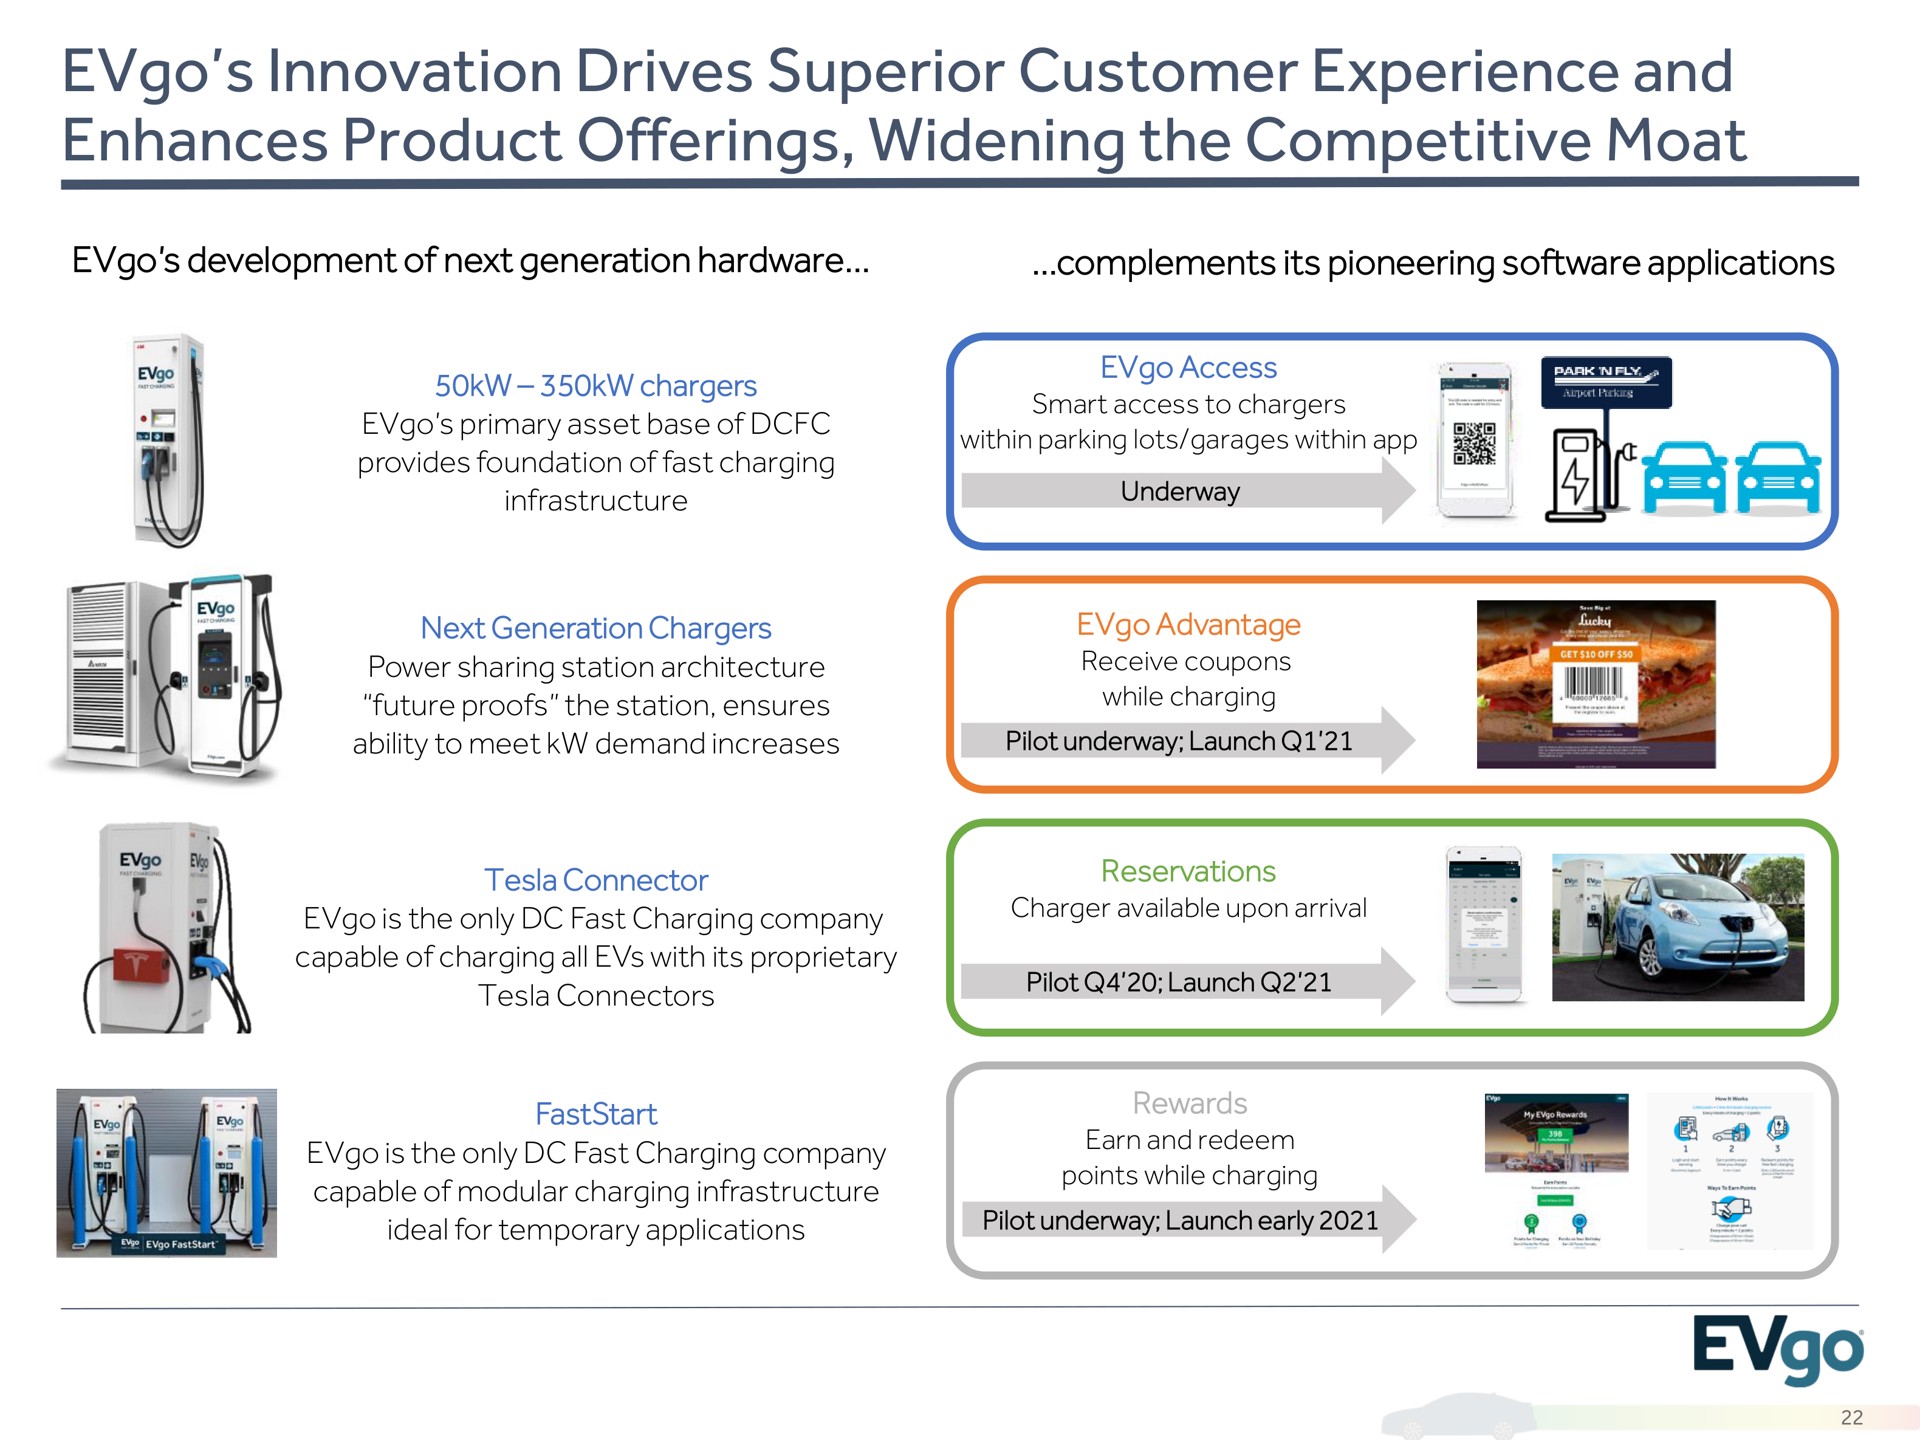 innovation drives superior customer experience and enhances product offerings widening the competitive moat pilot underway launch early | EVgo